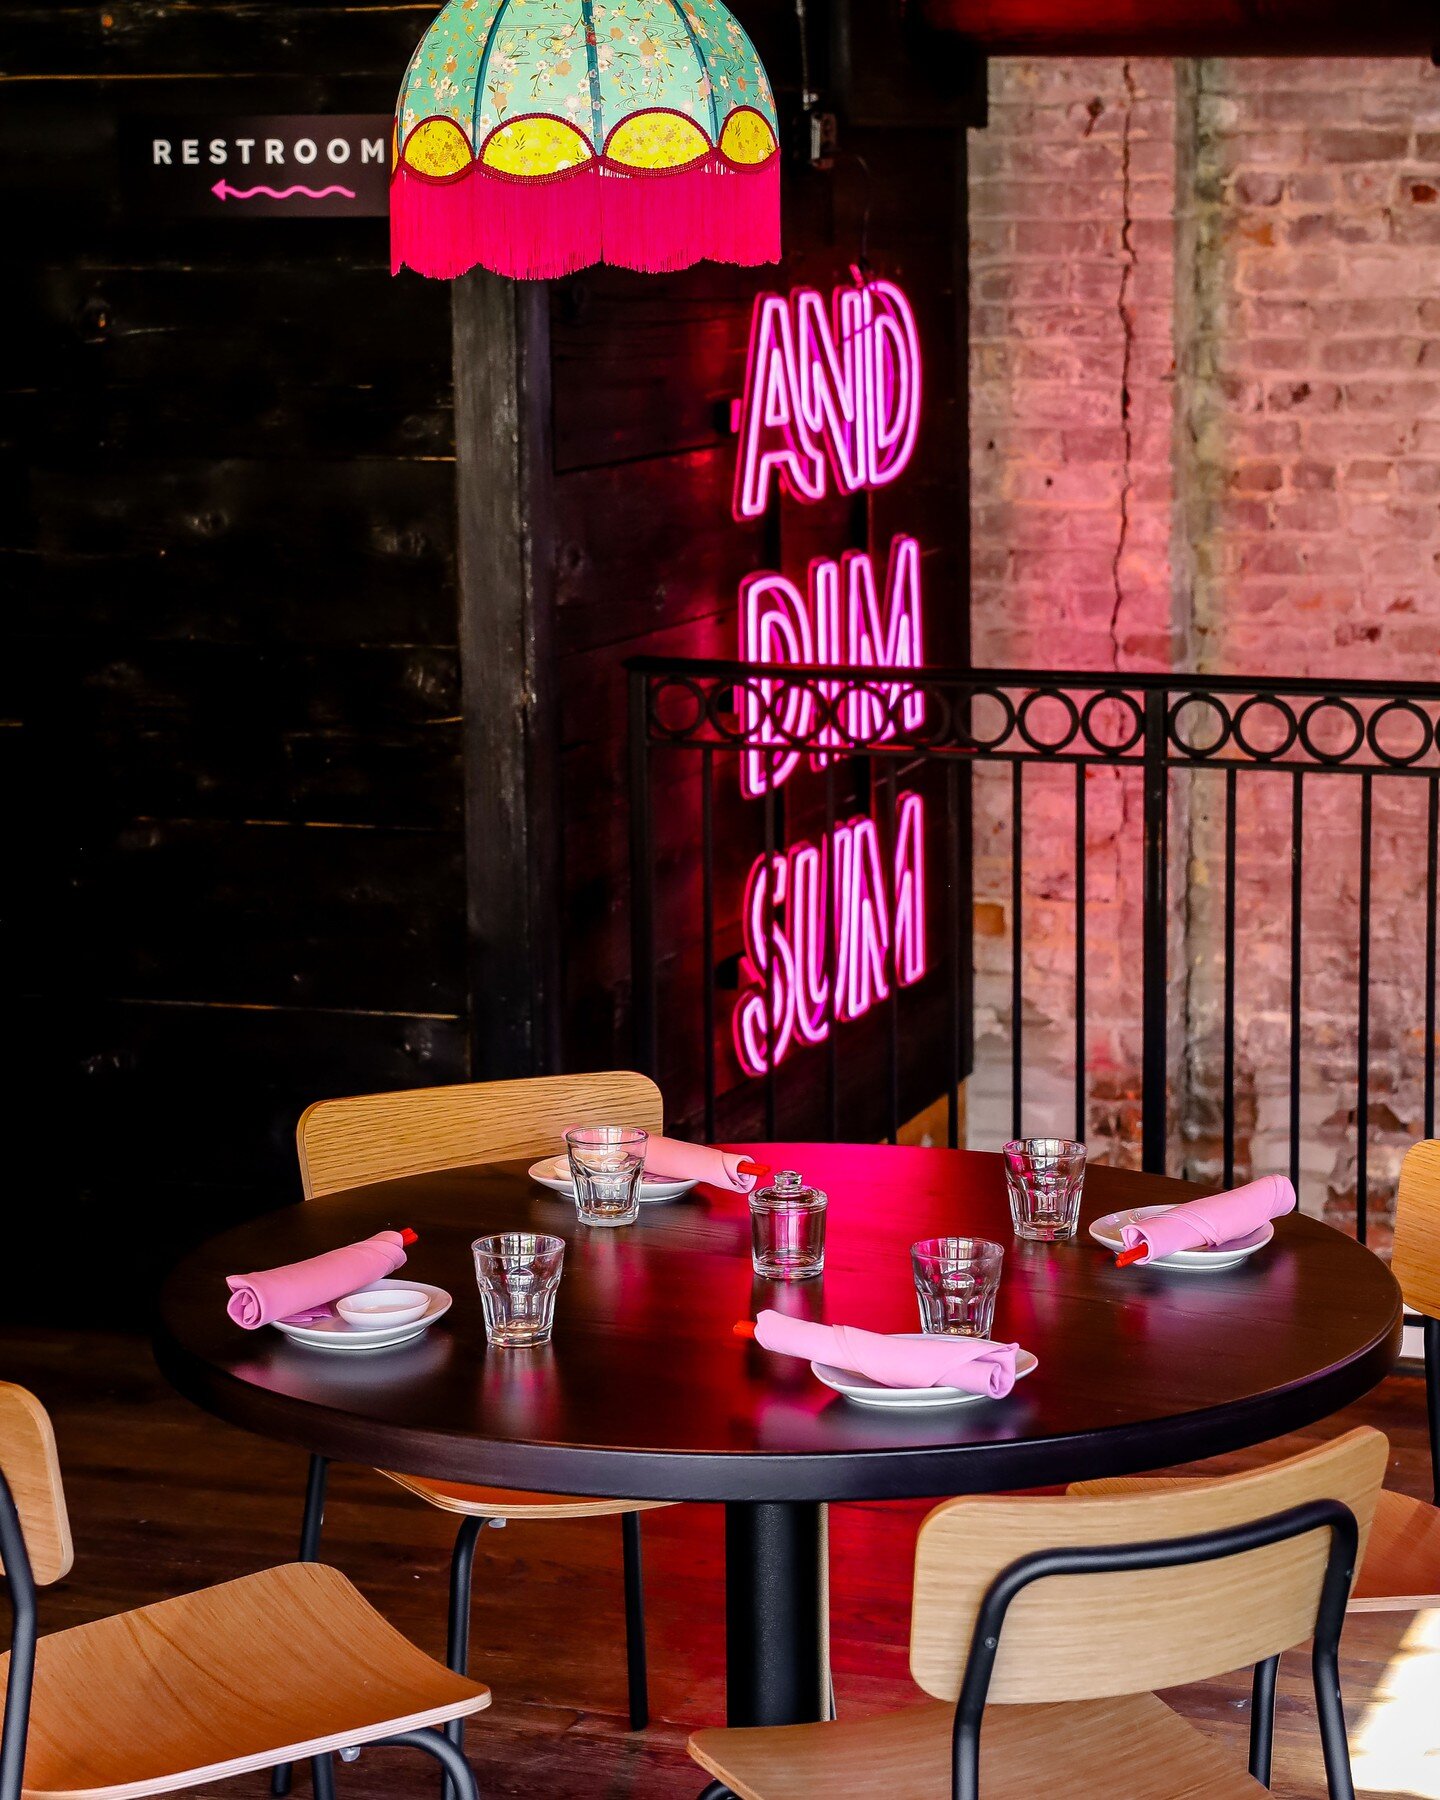 The new @anddimsumrva space is made up of moments to catch the eye and touch the heart! 💕

Traditional influences in the materials and patterns are combined with modern details like neon, fringe, and lively colors to create a unique, theatrical expe